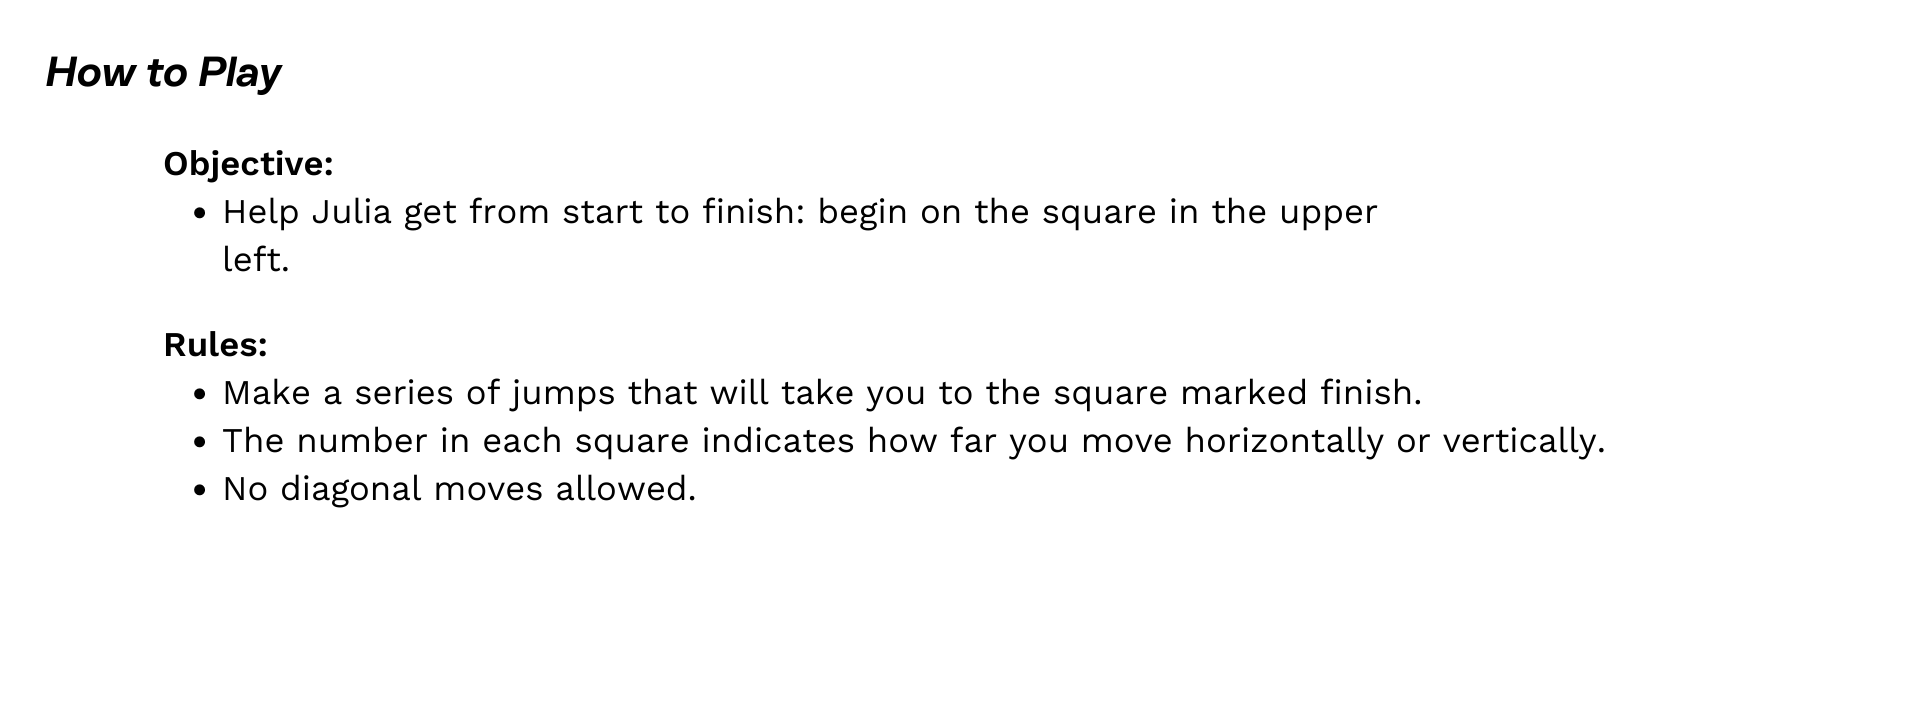 Rules: Make a series of jumps that will take you to the square marked finish. The number in each square indicates how far you move horizontally or vertically. No diagonal moves allowed.